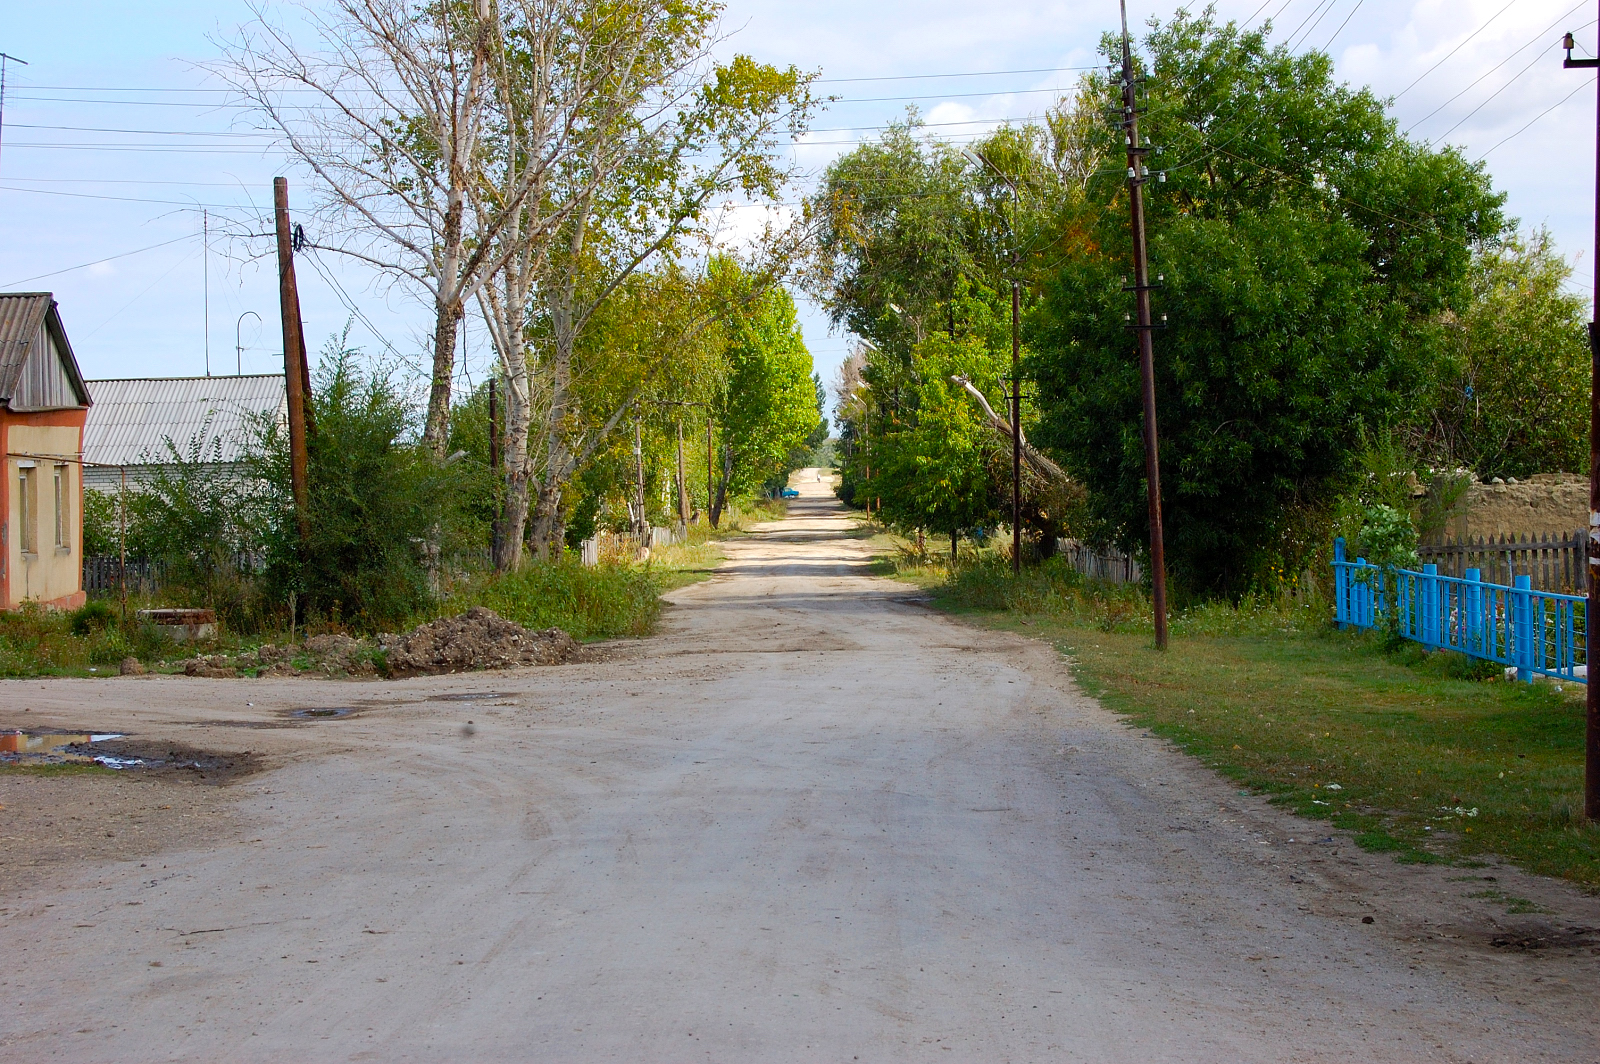 View from of the street in front of the school house. Source: Steve Schreiber (2006).